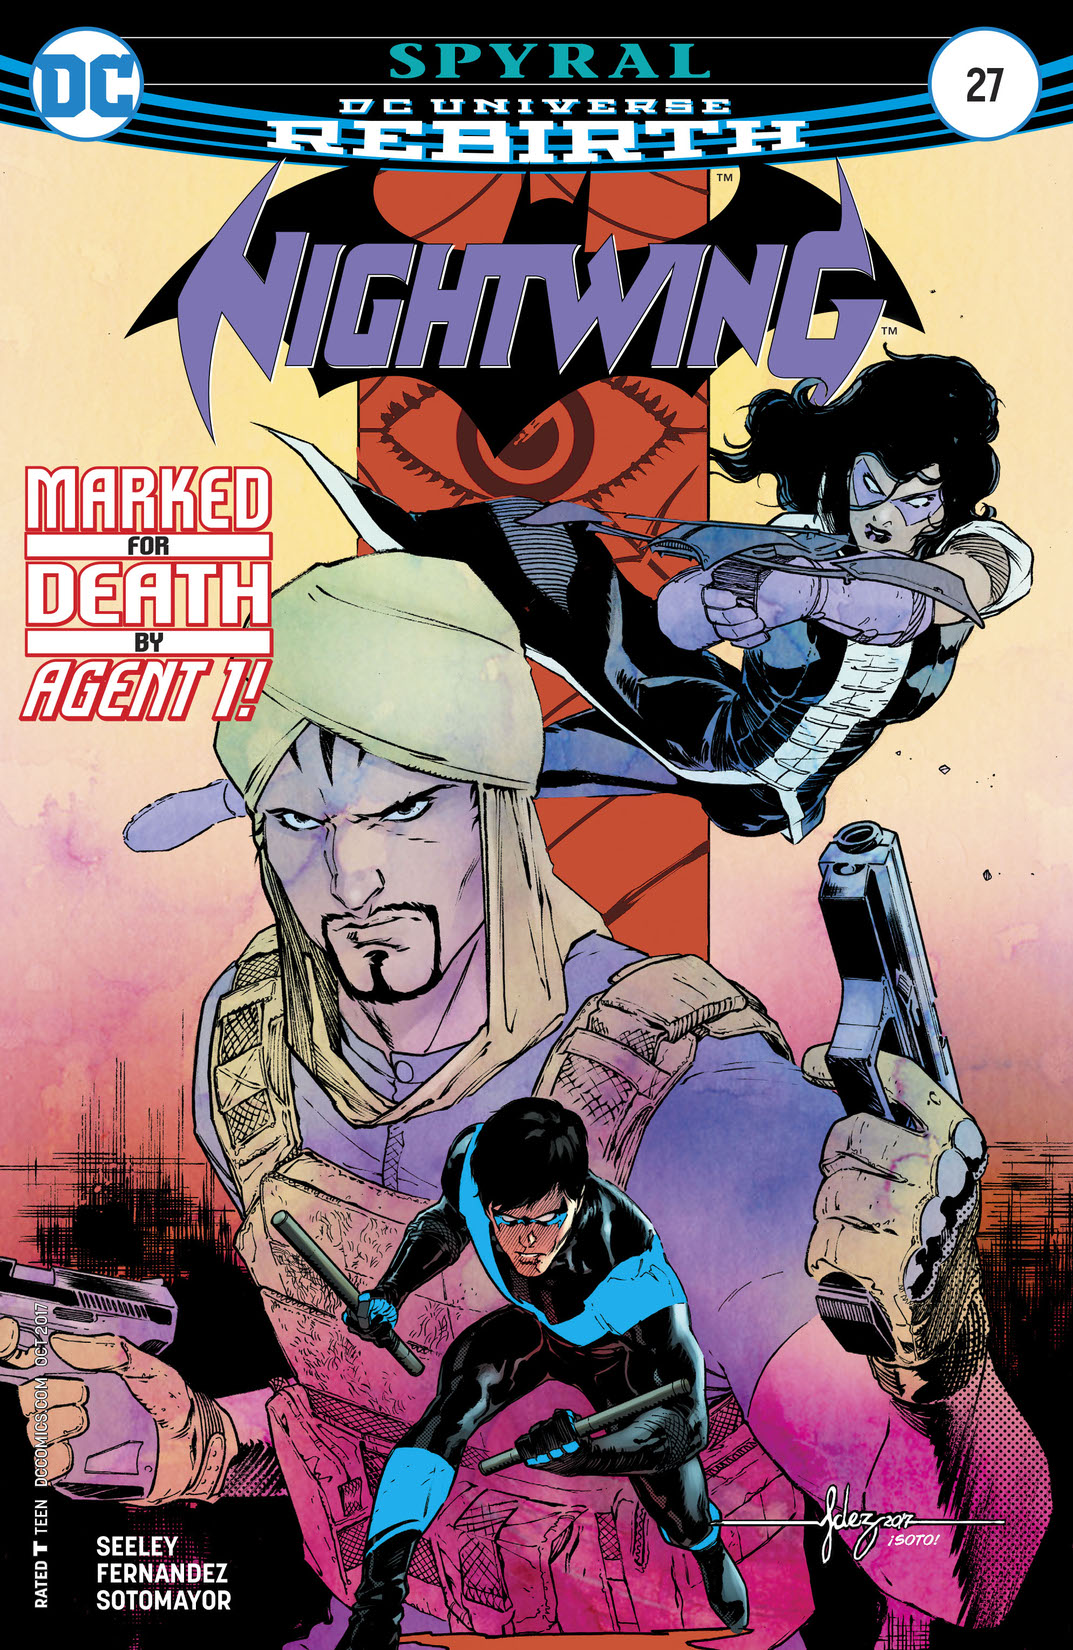 Nightwing (2016-) #27 preview images